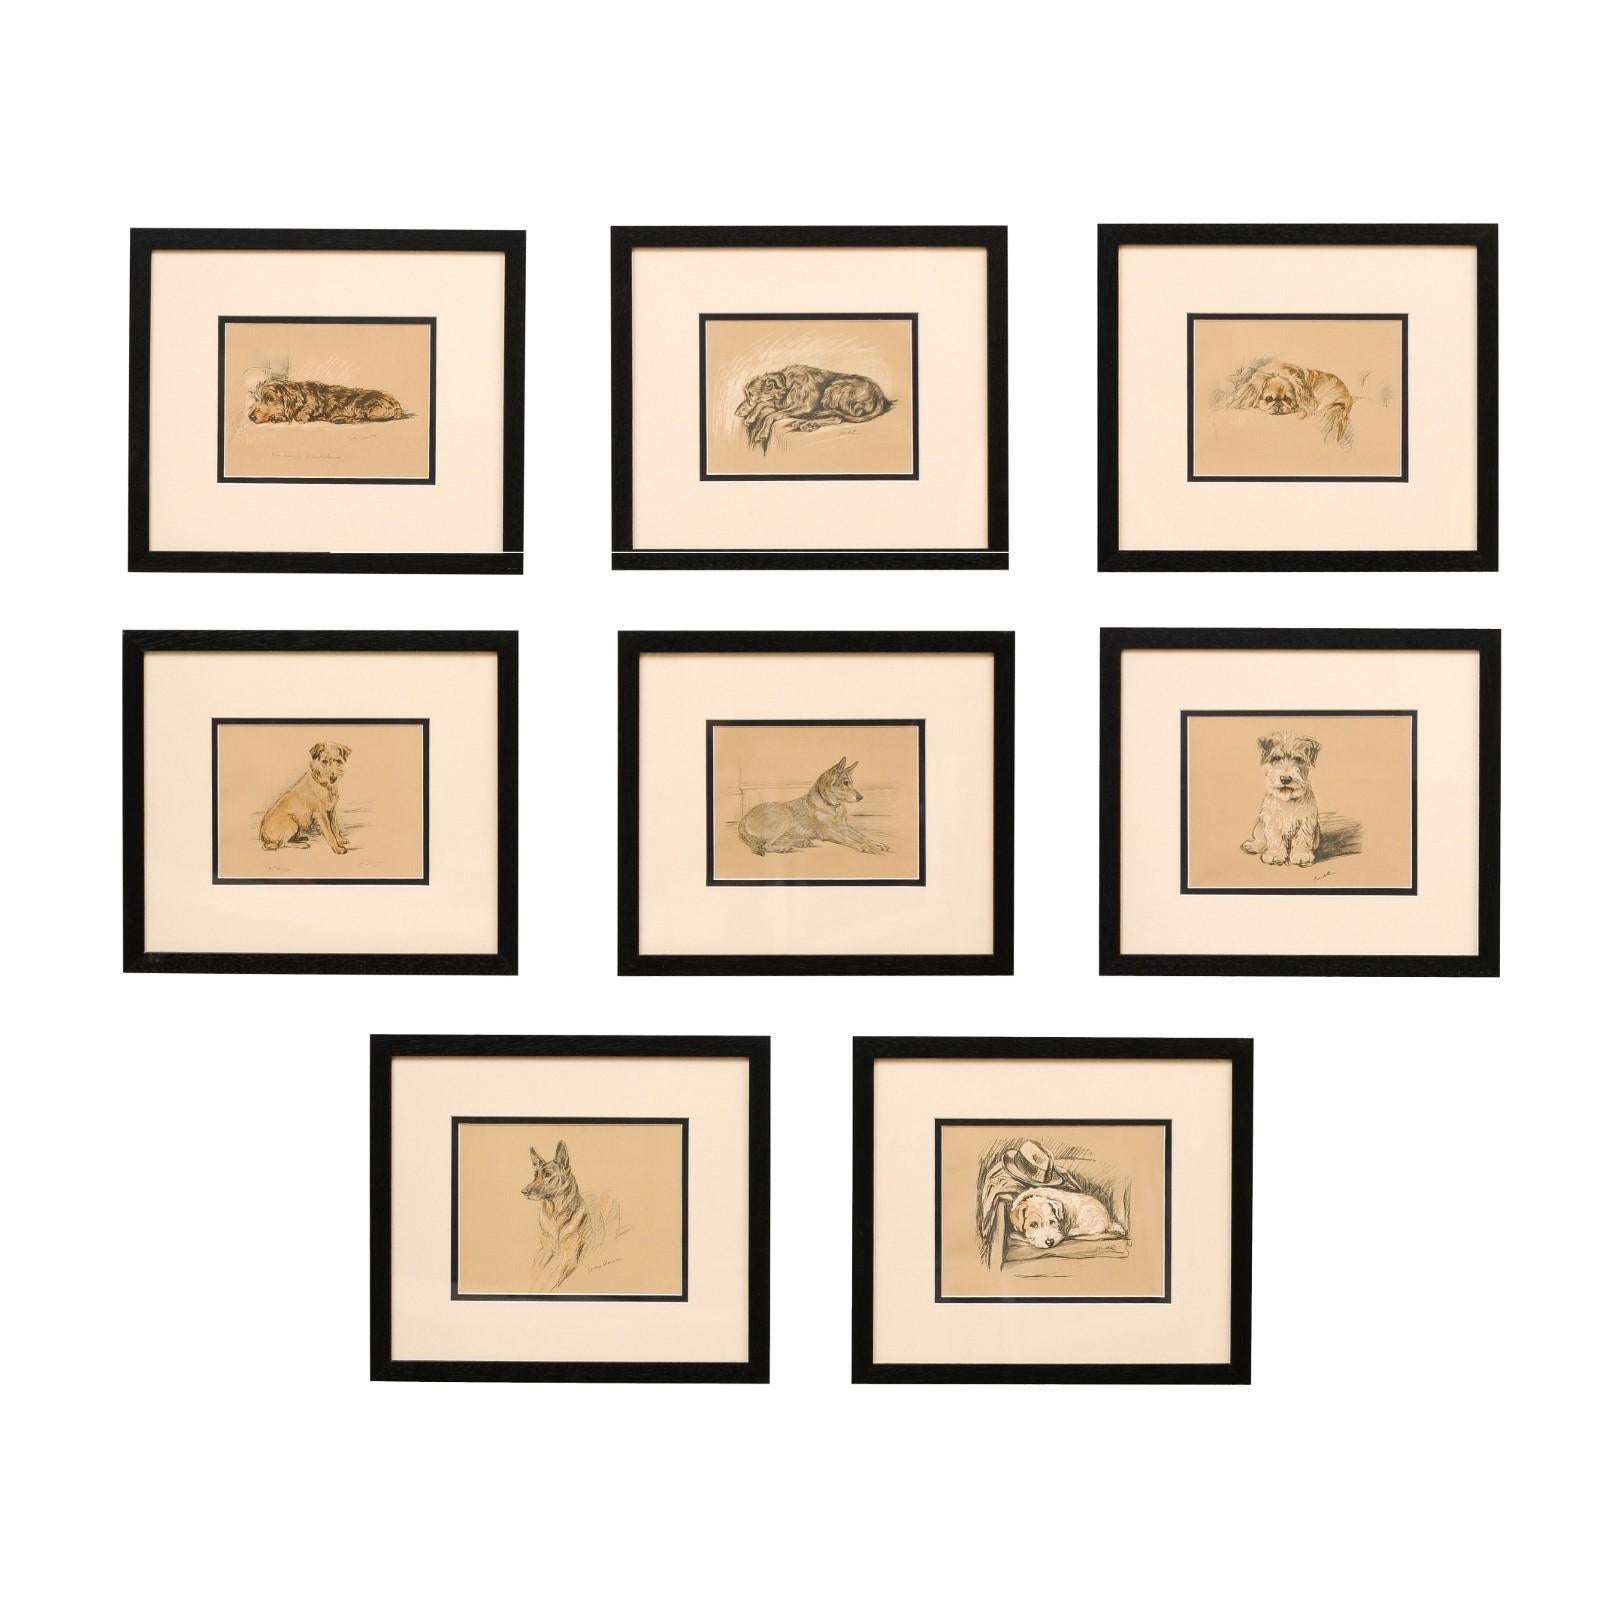 A set of 8 English Lucy Dawson prints from the 20th century, in black frames. We are also happy to sell the prints individually, $495 each. Created in England during the 20th century, each of this set of 8 prints, created by Lucy Dawson, features a